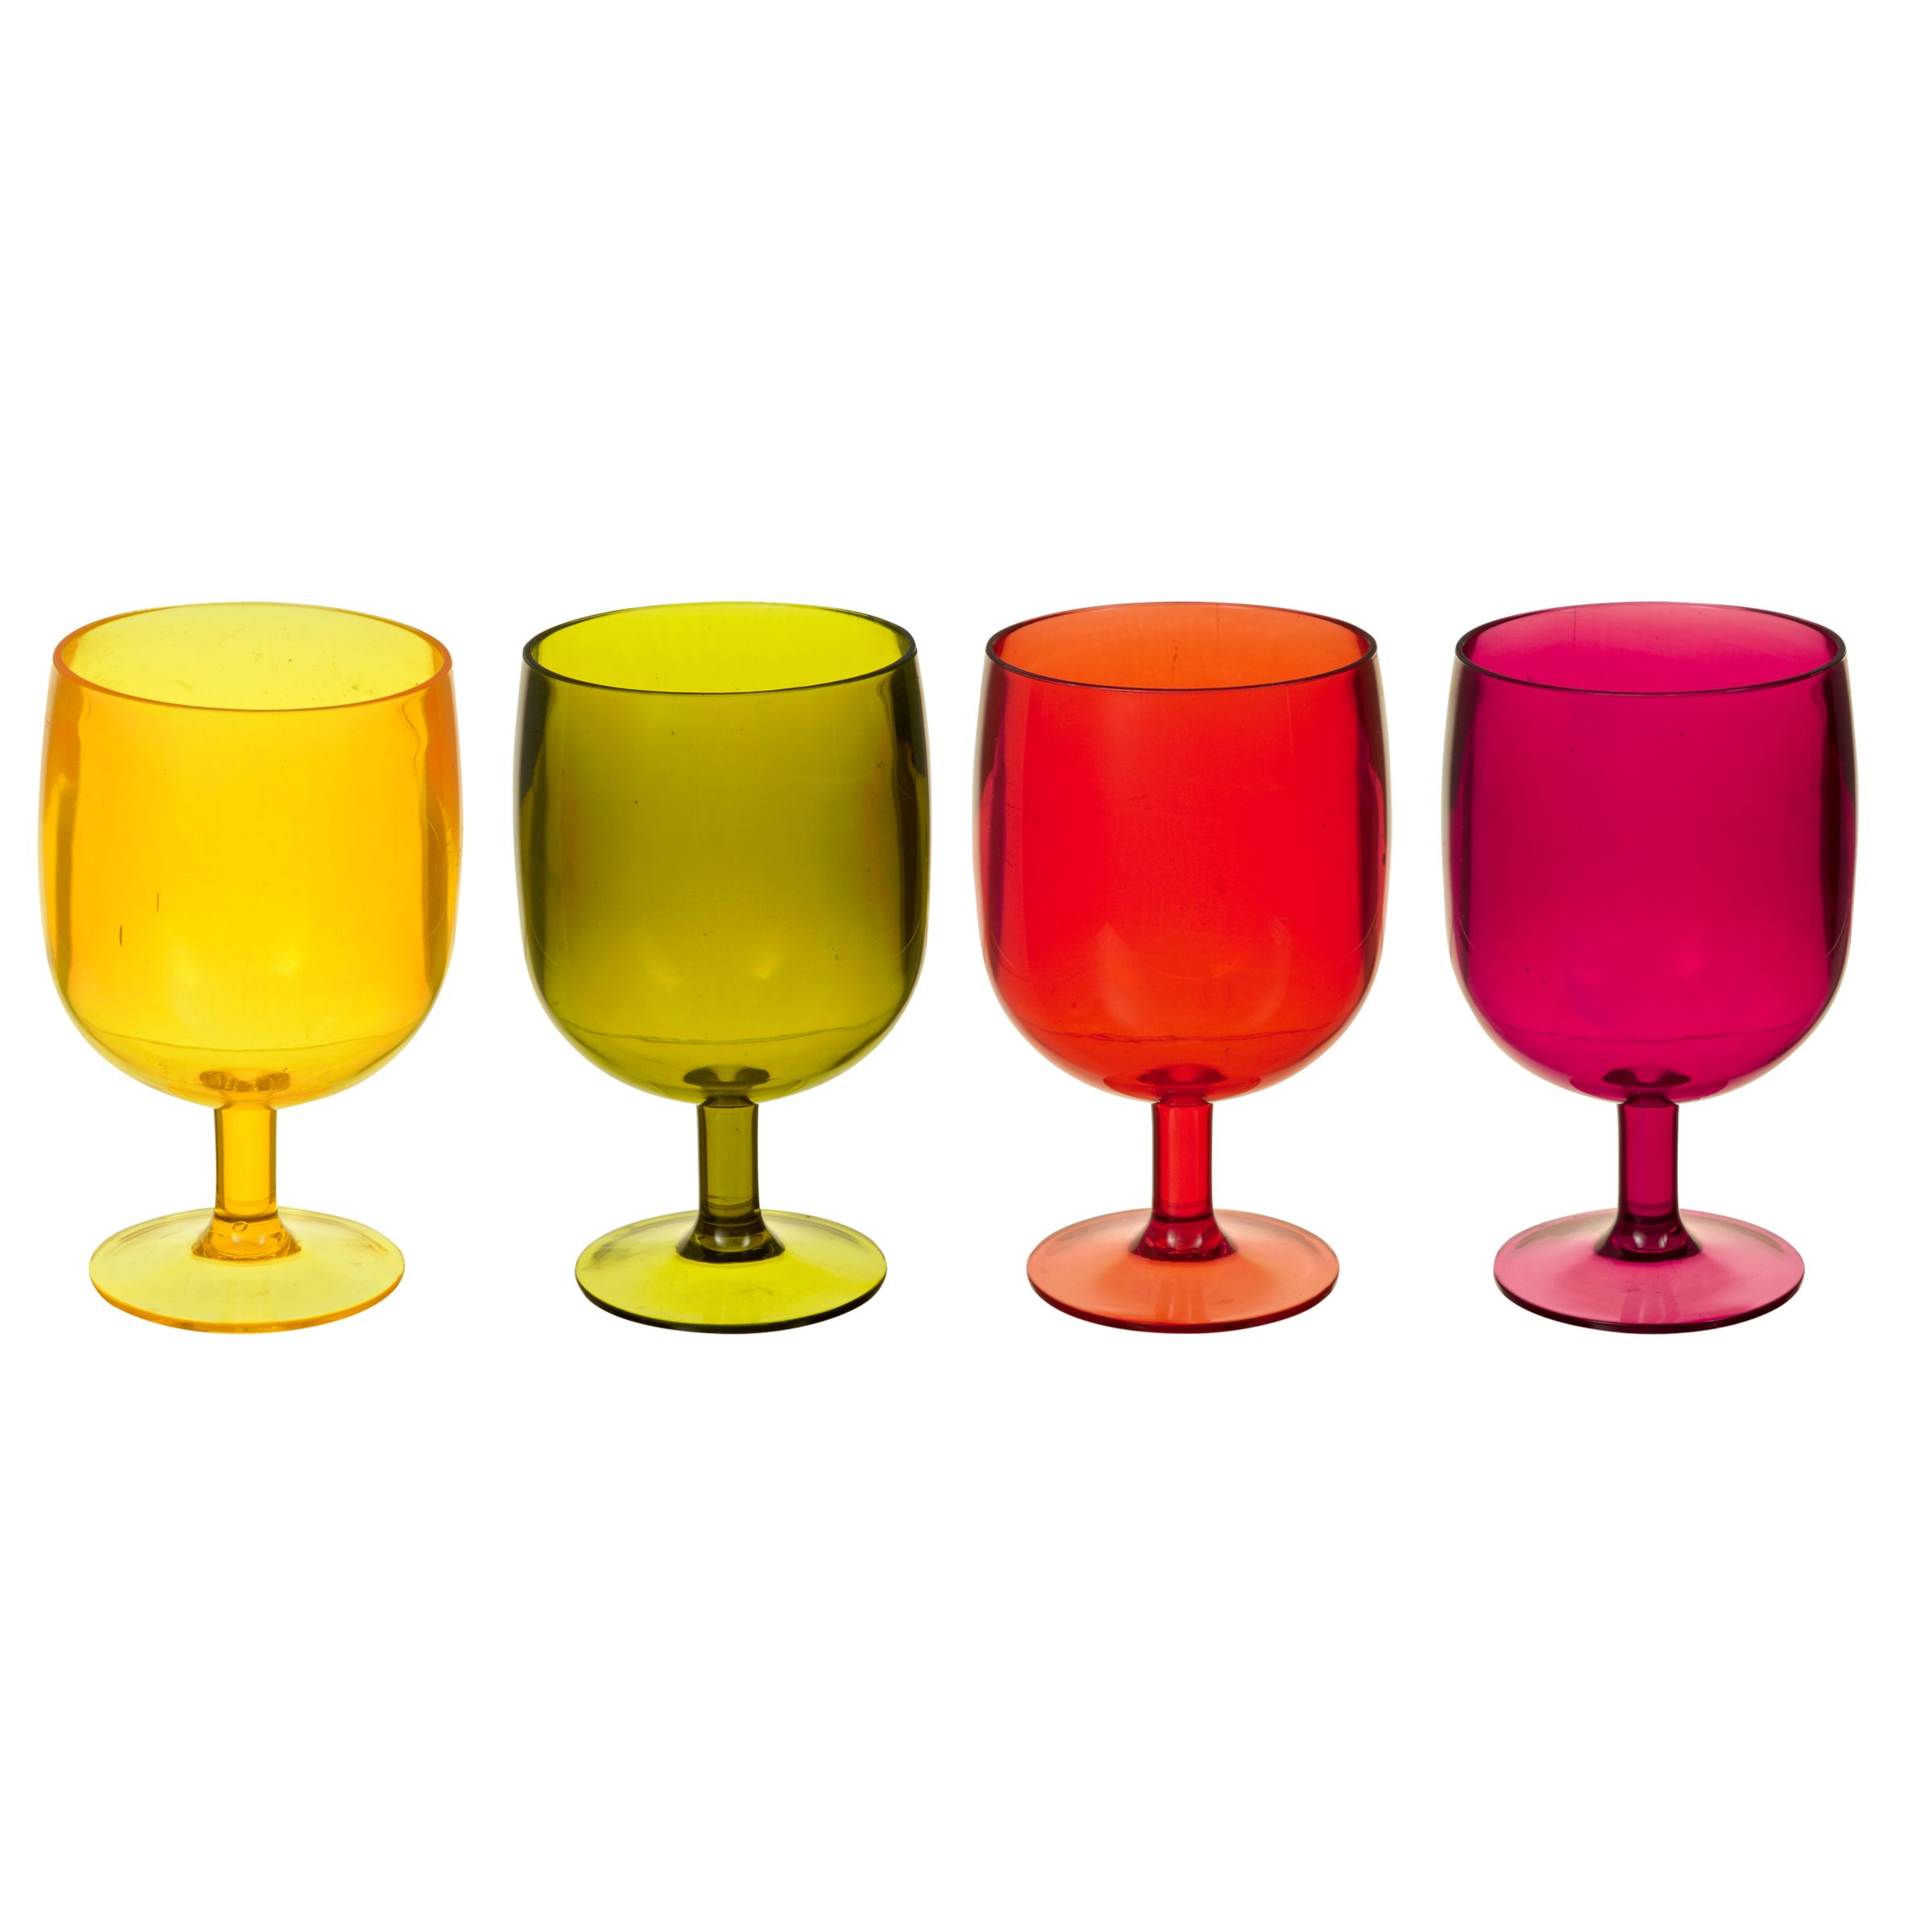 House by John Lewis Stacking Wine Glasses, Set of 4